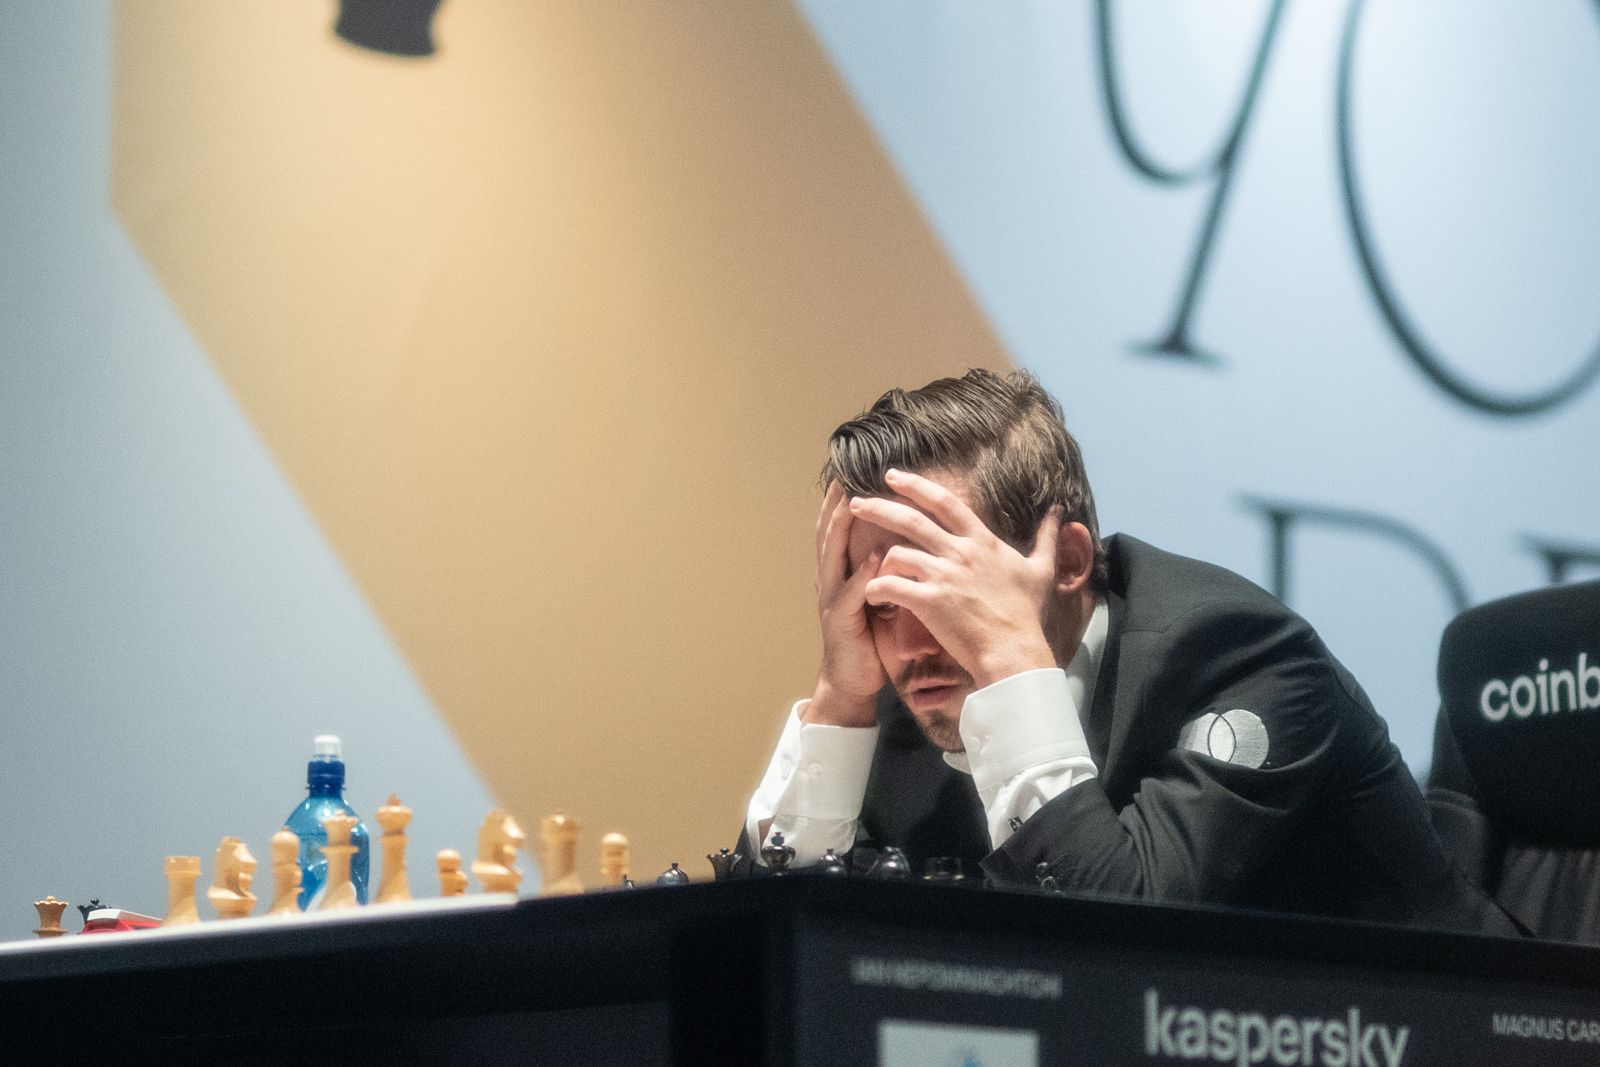 Carlsen Wins Game 8 As Nepo Falters In FIDE World Chess Championship - Chess .com